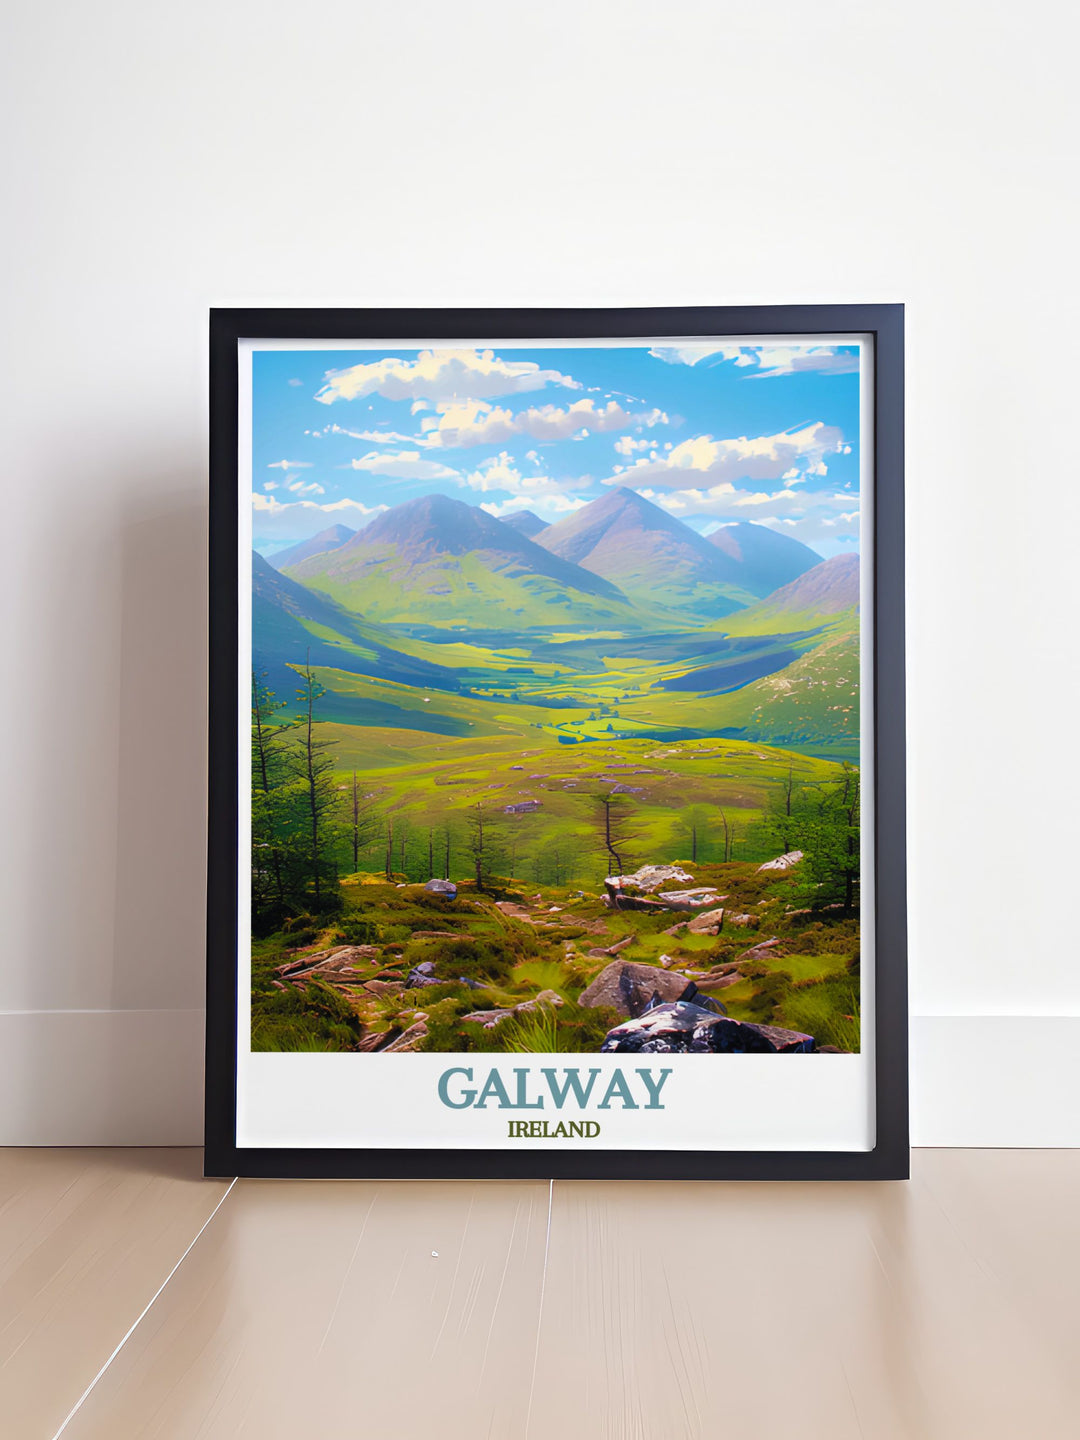 Experience the historical allure of Galway with this beautifully illustrated poster. Depicting iconic landmarks such as Lynchs Castle and St. Nicholas Collegiate Church, this piece celebrates the citys rich past and cultural vibrancy, making it a perfect addition to any history enthusiasts collection.